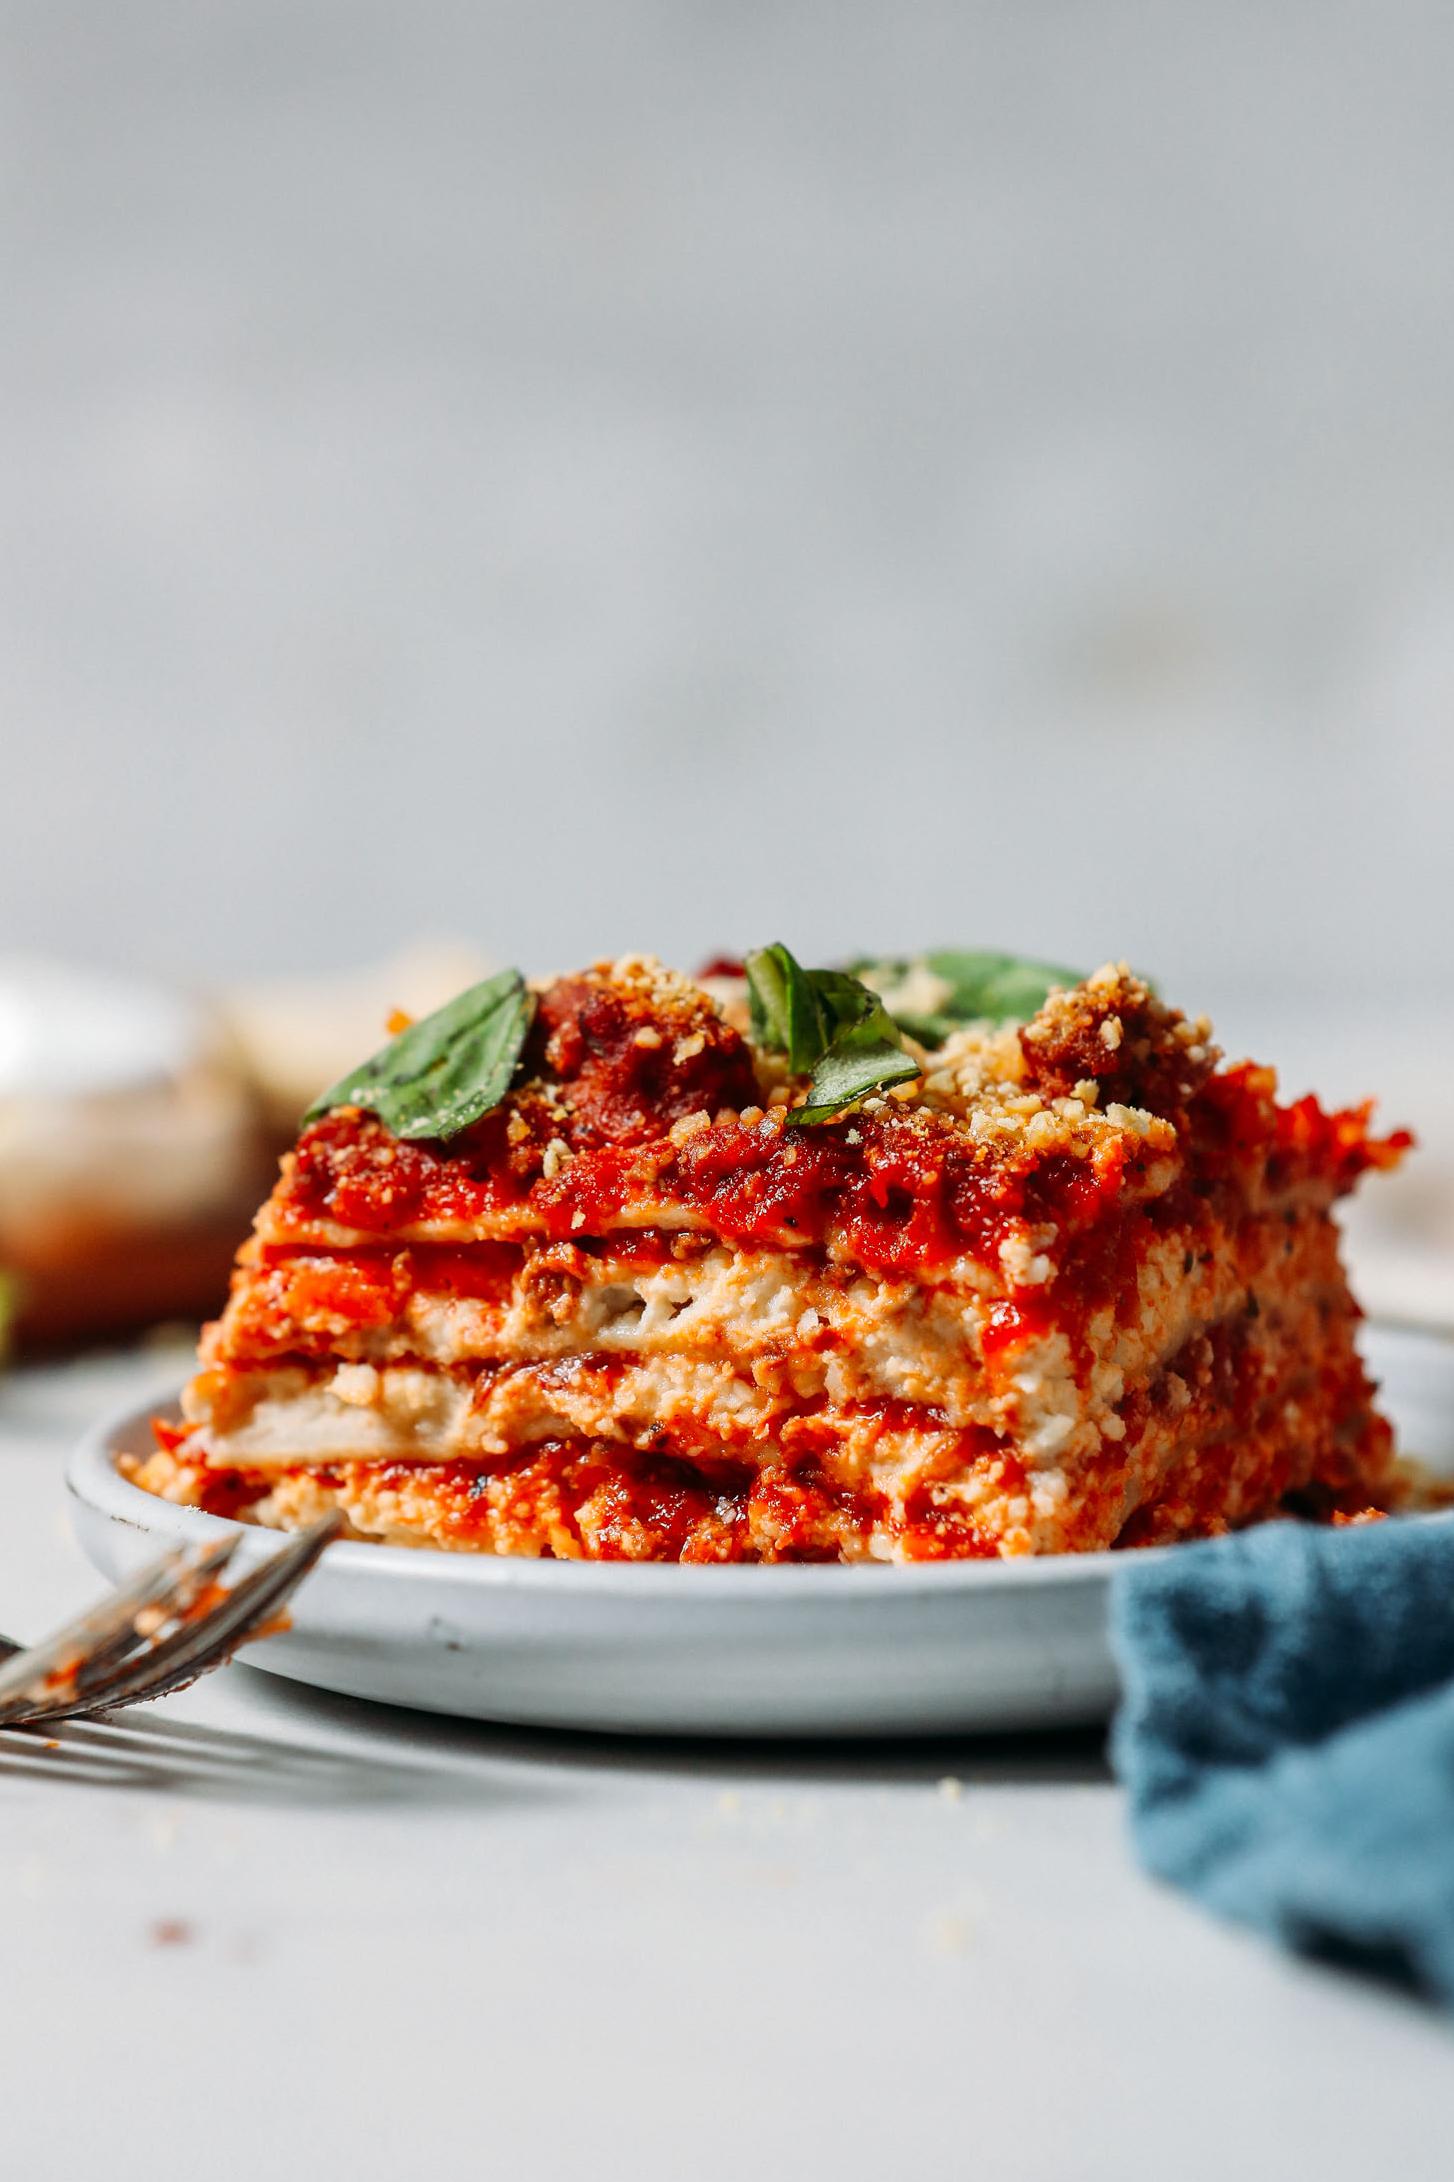  Gluten-free and dairy-free never tasted so good with this amazing veggie lasagna recipe!